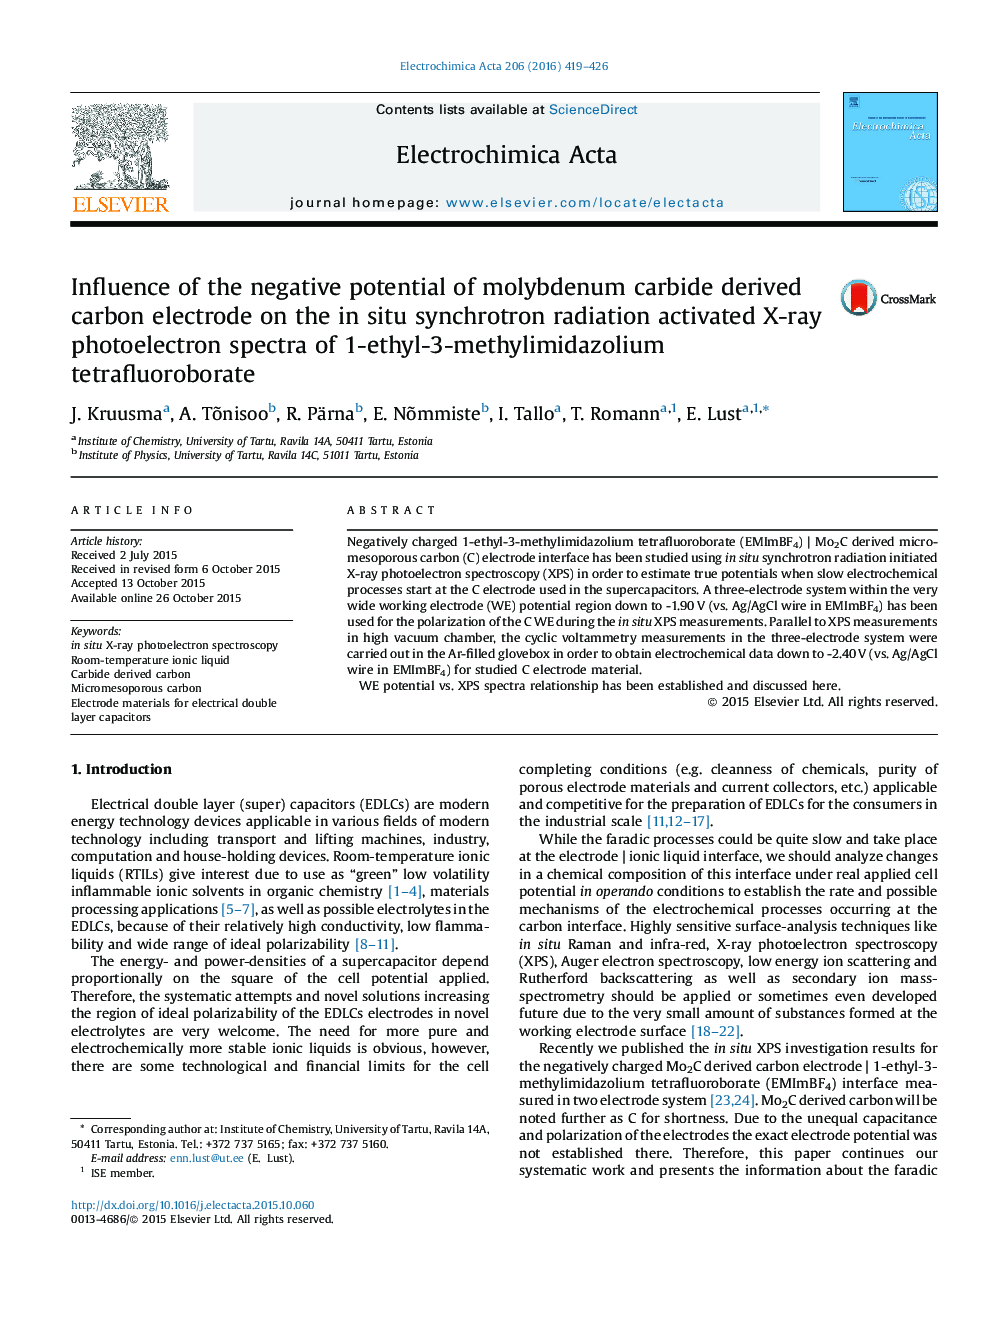 Influence of the negative potential of molybdenum carbide derived carbon electrode on the in situ synchrotron radiation activated X-ray photoelectron spectra of 1-ethyl-3-methylimidazolium tetrafluoroborate